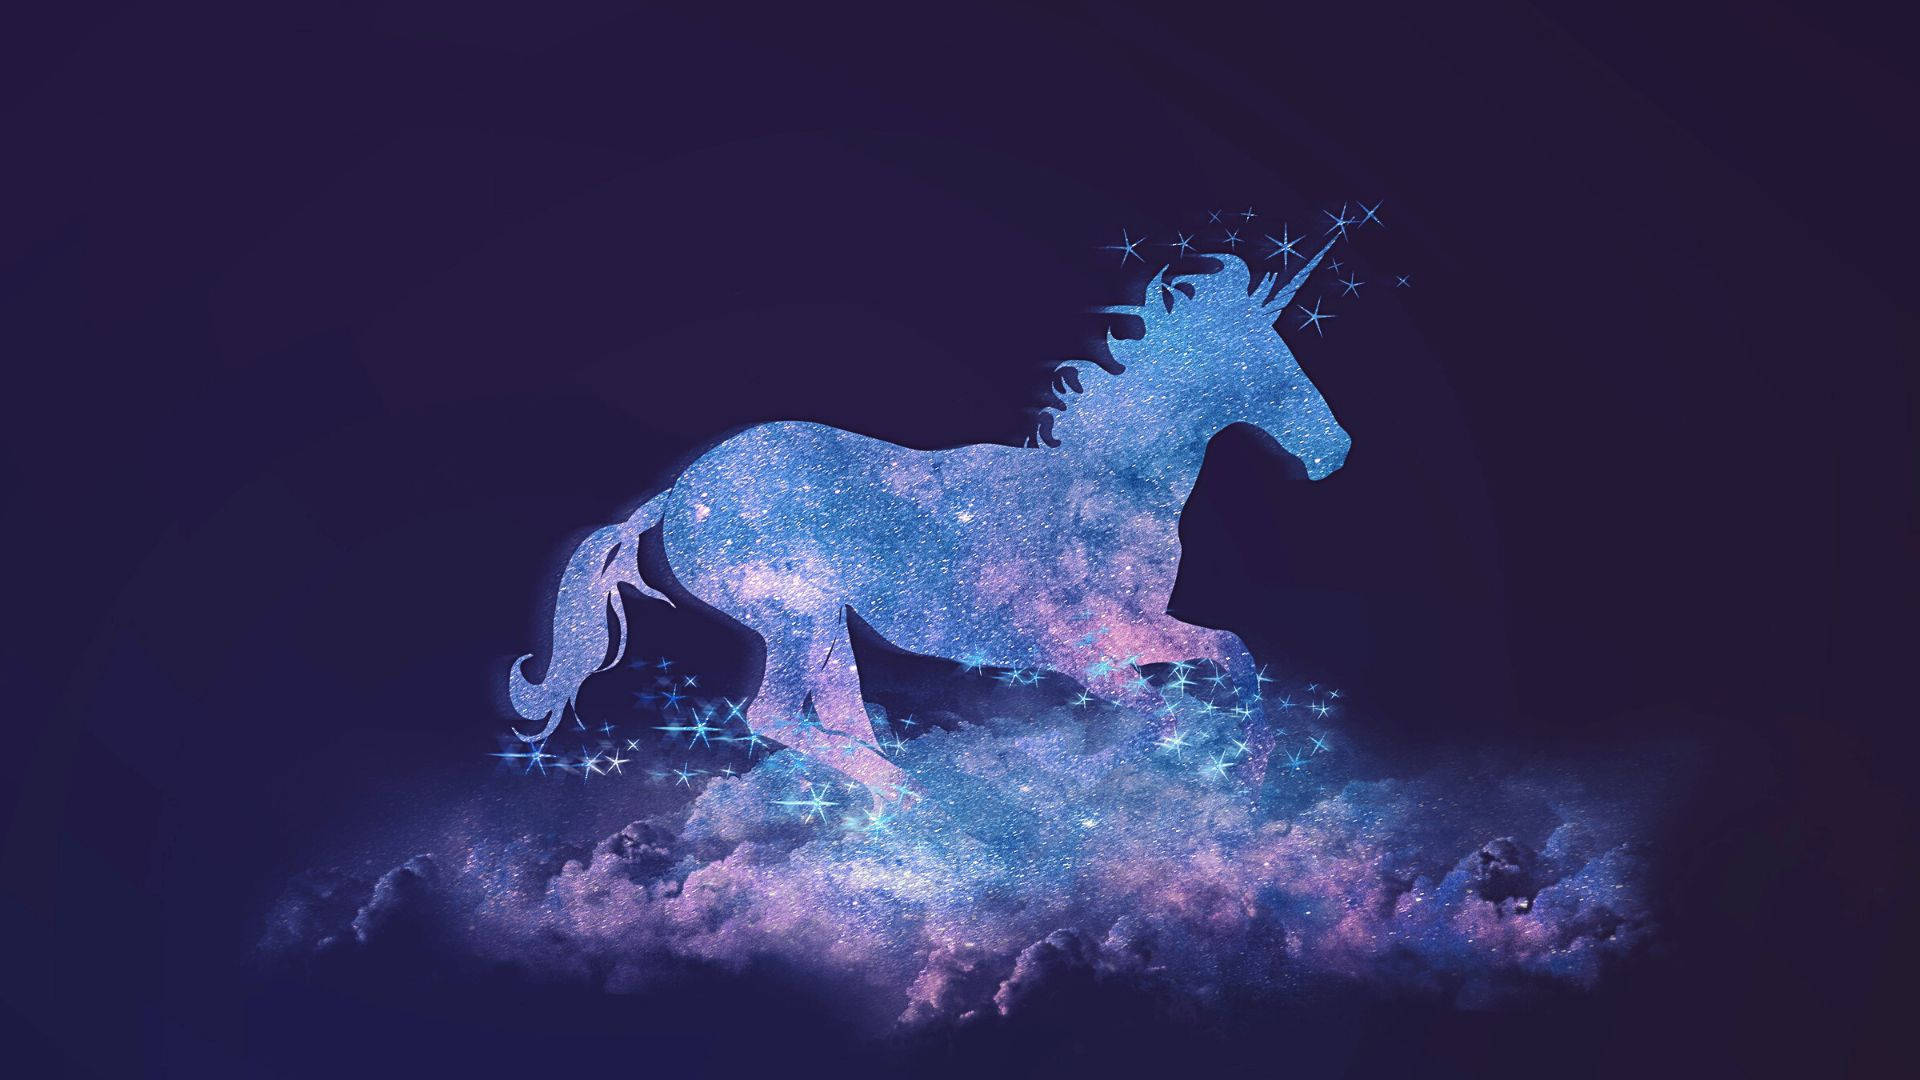 "Let your inner unicorn out and show your unique side" Wallpaper